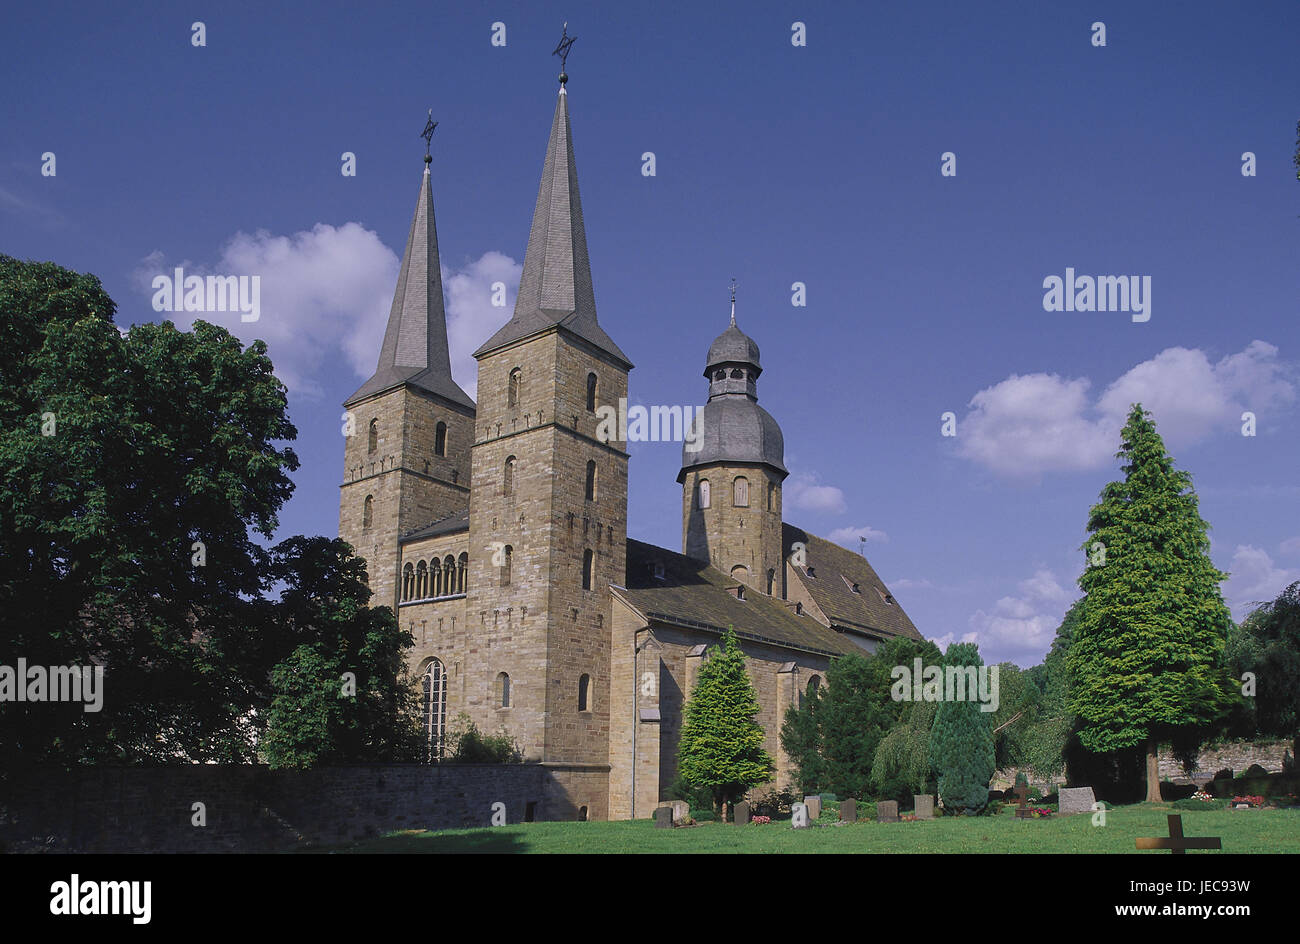 Germany, North Rhine-Westphalia, Marien's cathedral, Vörden, abbey, church, Teutoburger wood, place of interest, structure, historically, architecture, cloister attachment, cloister area, abbey church, minster, cemetery, trees, outside, Stock Photo